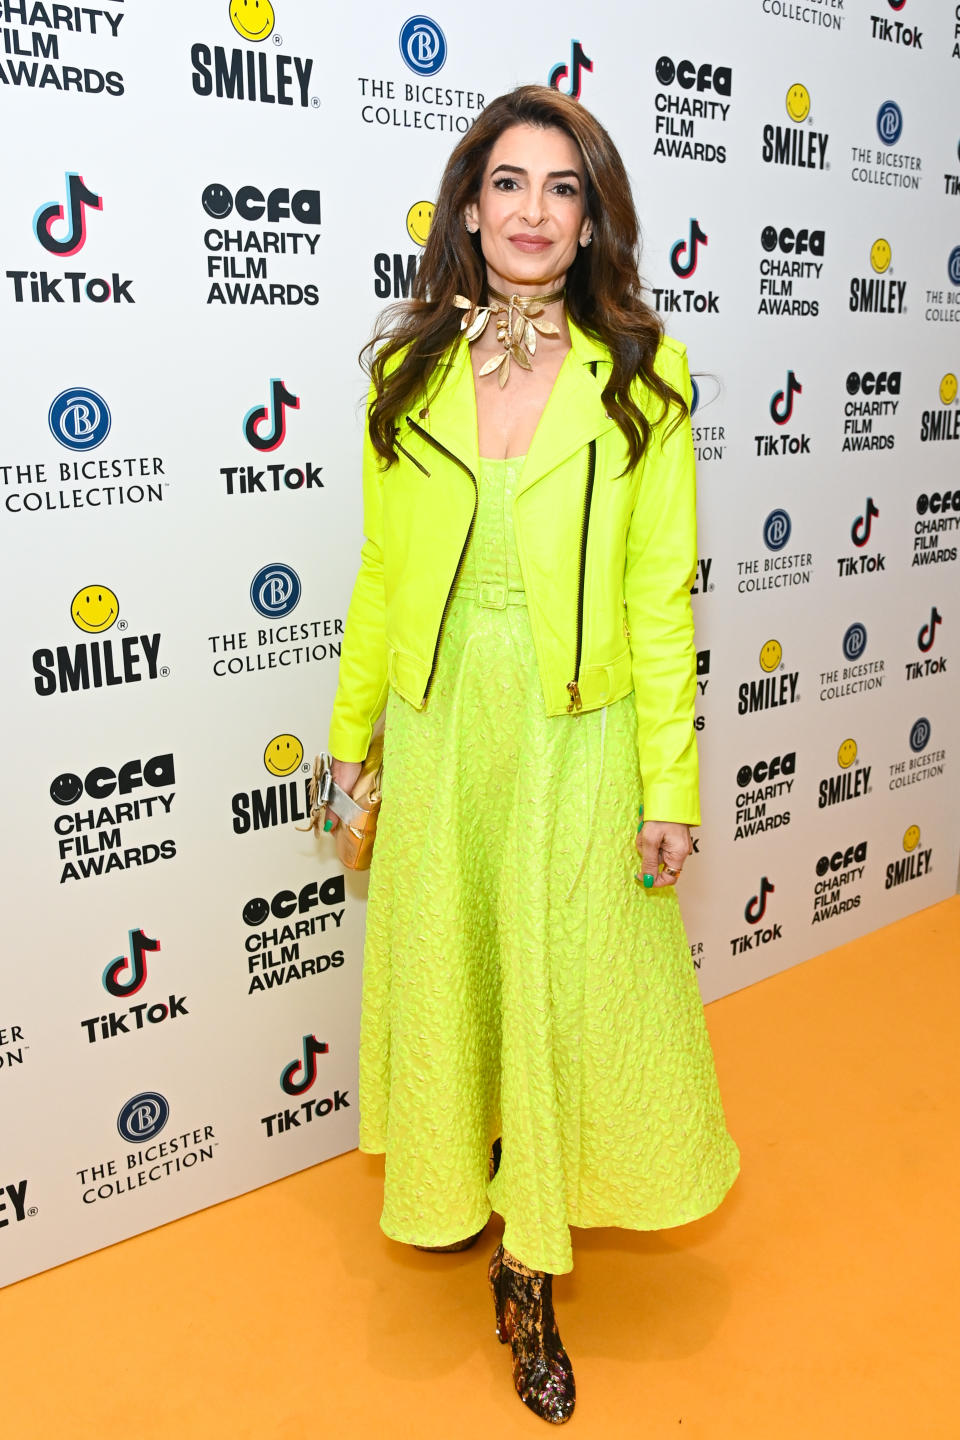 LONDON, ENGLAND - MARCH 21: Tala Alamuddin attends the Smiley Charity Film Awards at Odeon Luxe Leicester Square on March 21, 2023 in London, England. (Photo by Dave Benett/Getty Images for Smiley Charity Film Awards)